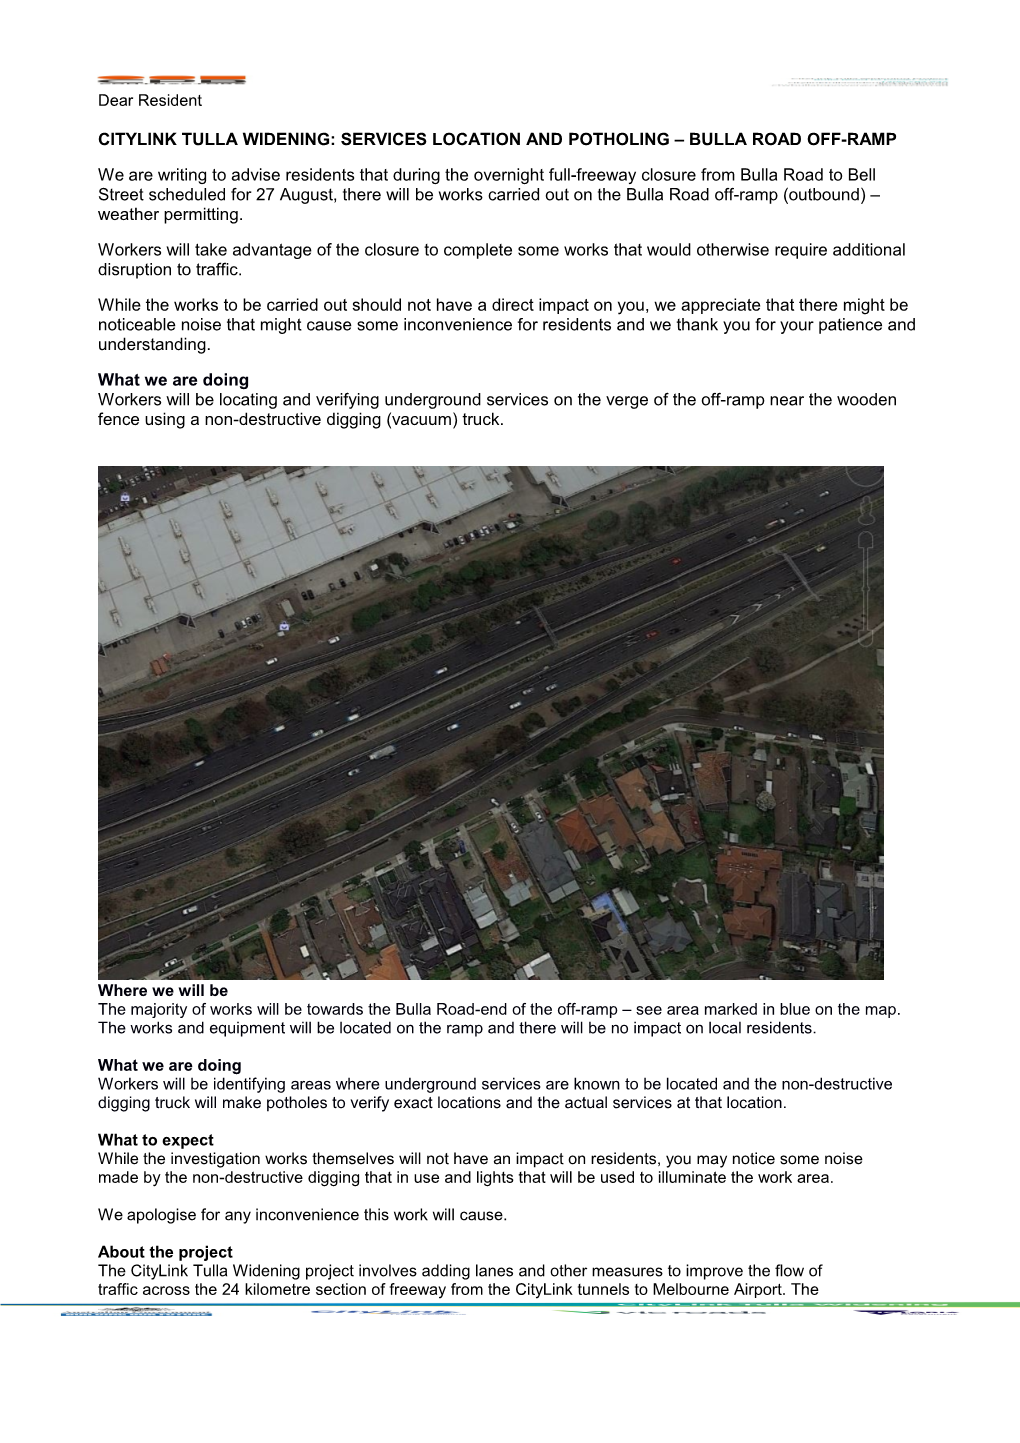 Citylink Tulla Widening: Services Location and Potholing Bulla Road Off-Ramp